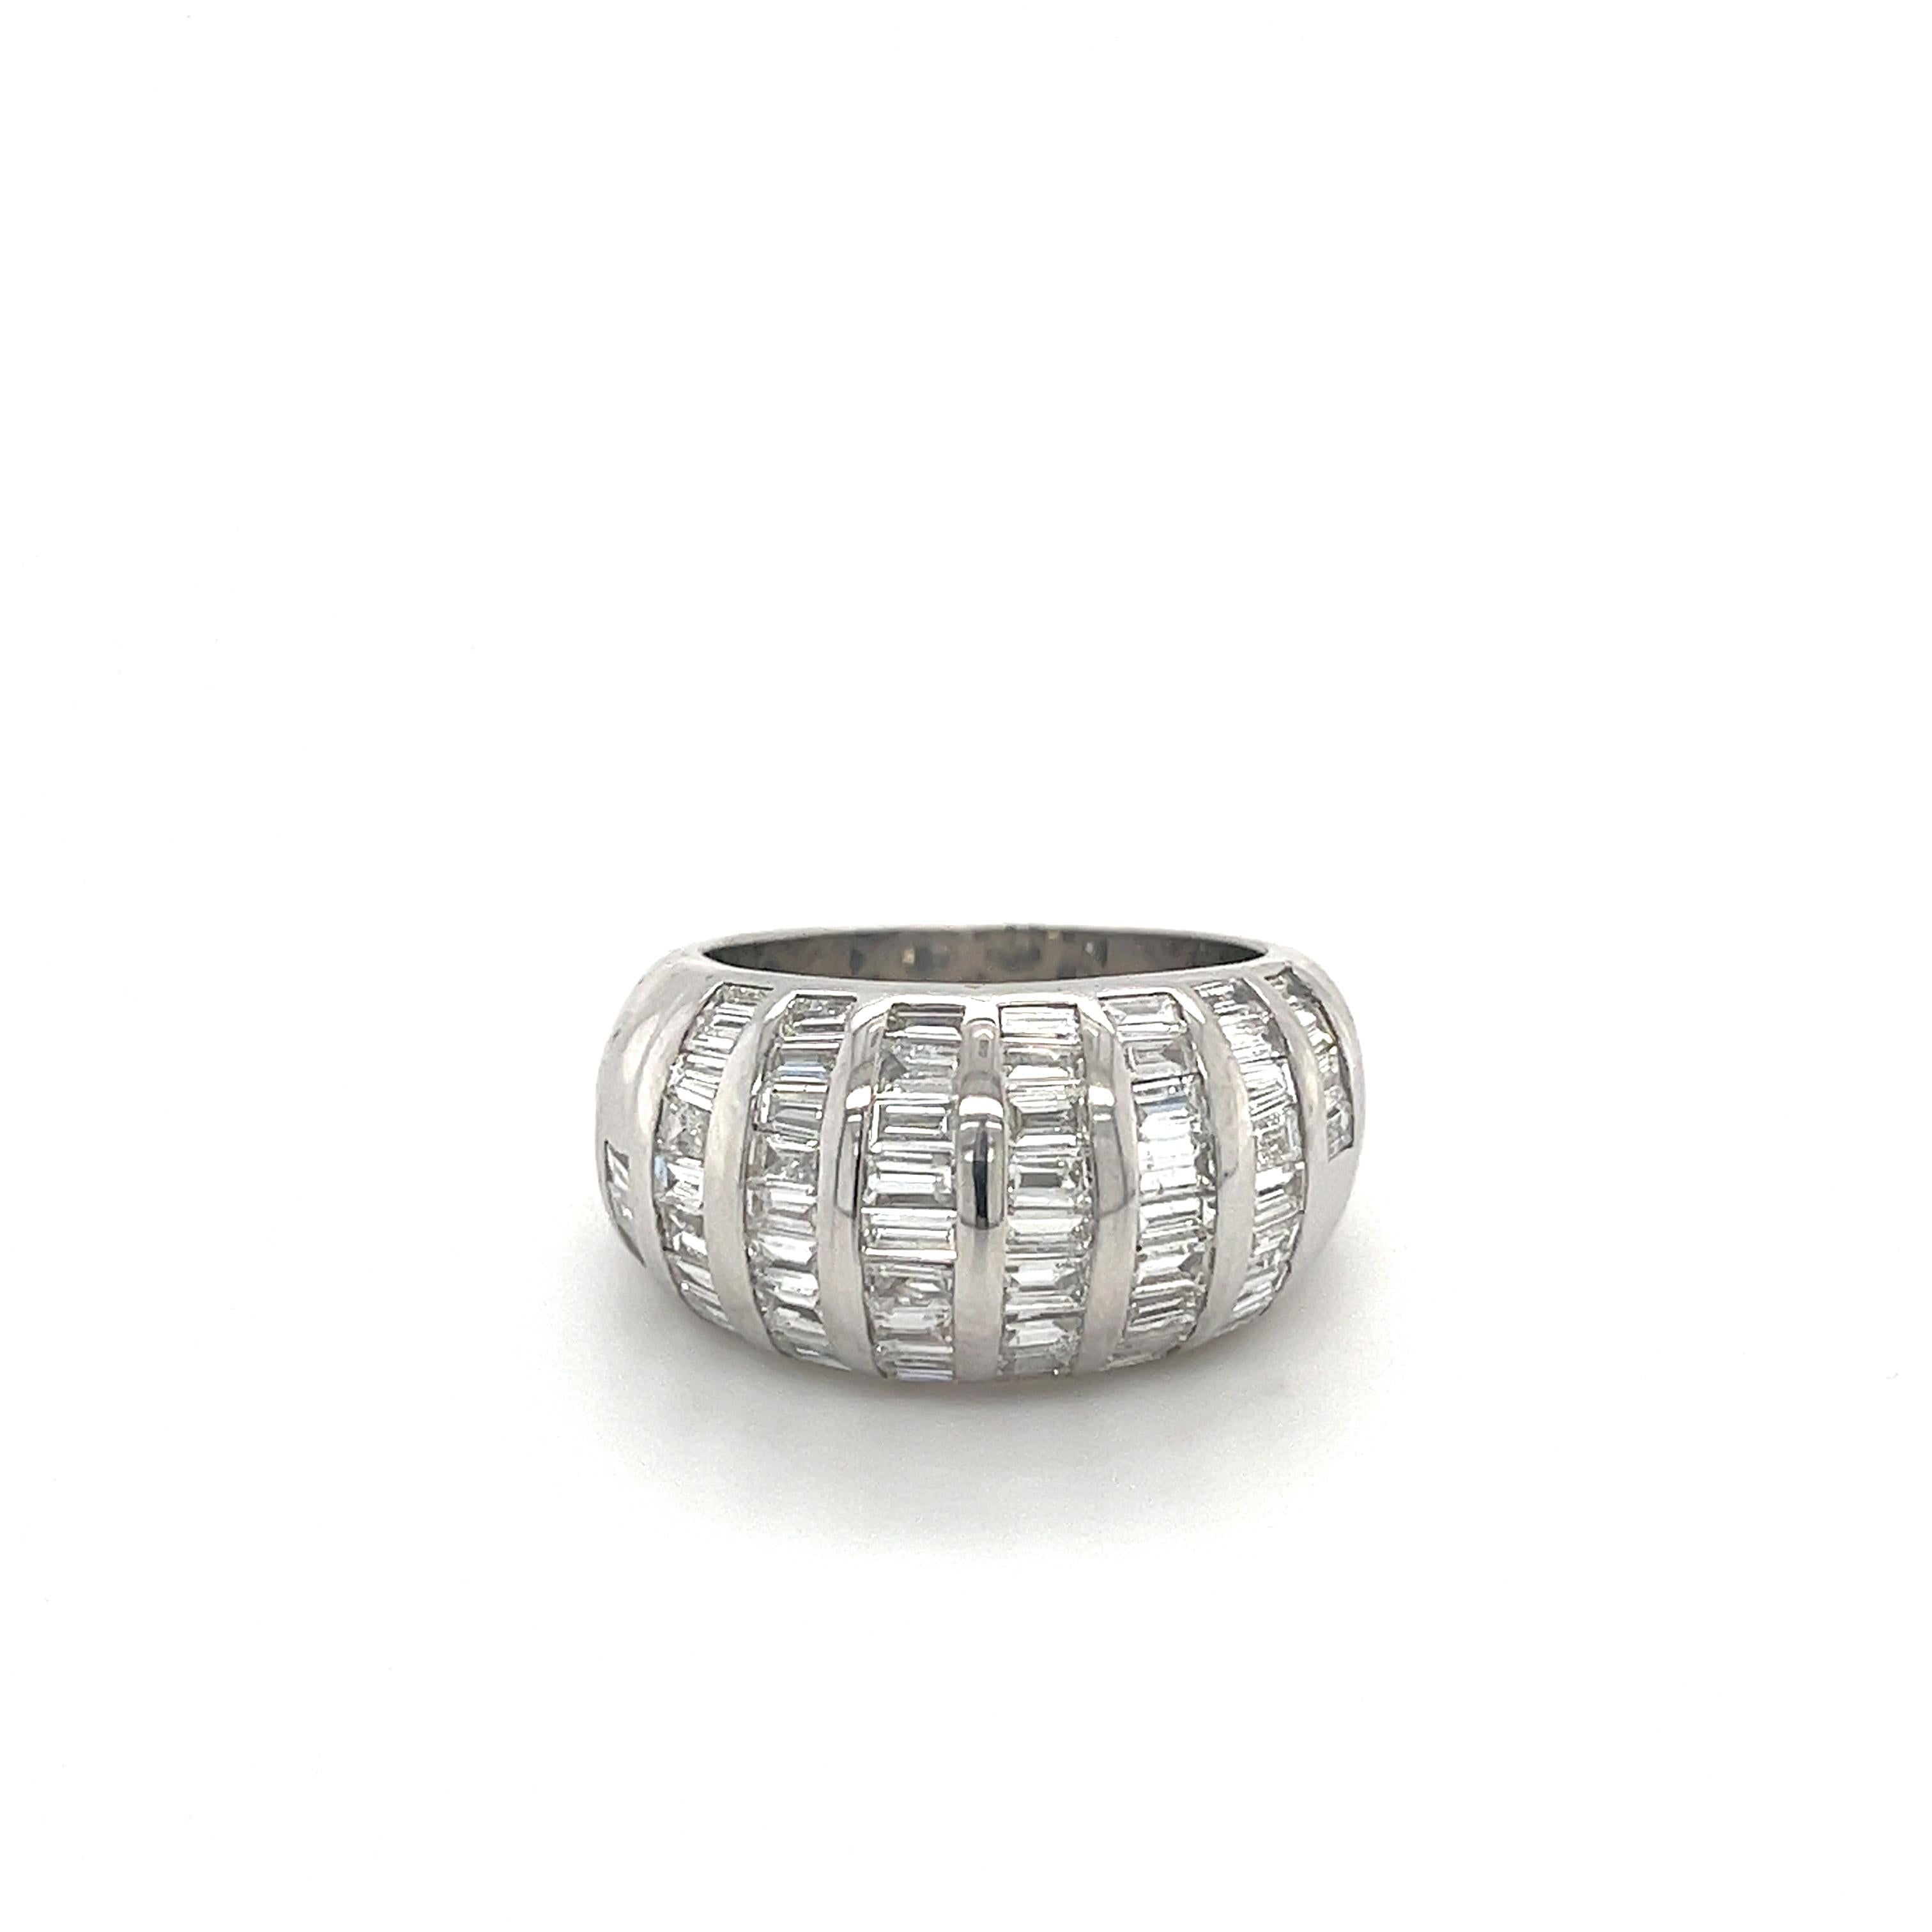 Baguette-cut natural diamond cluster dome ring set in a smooth 18 karat solid white gold setting. Gallery back setting for a comfortable and breathable fit on the finger. 

The diamonds are white, eye-clean stones. Tension set with a white gold half